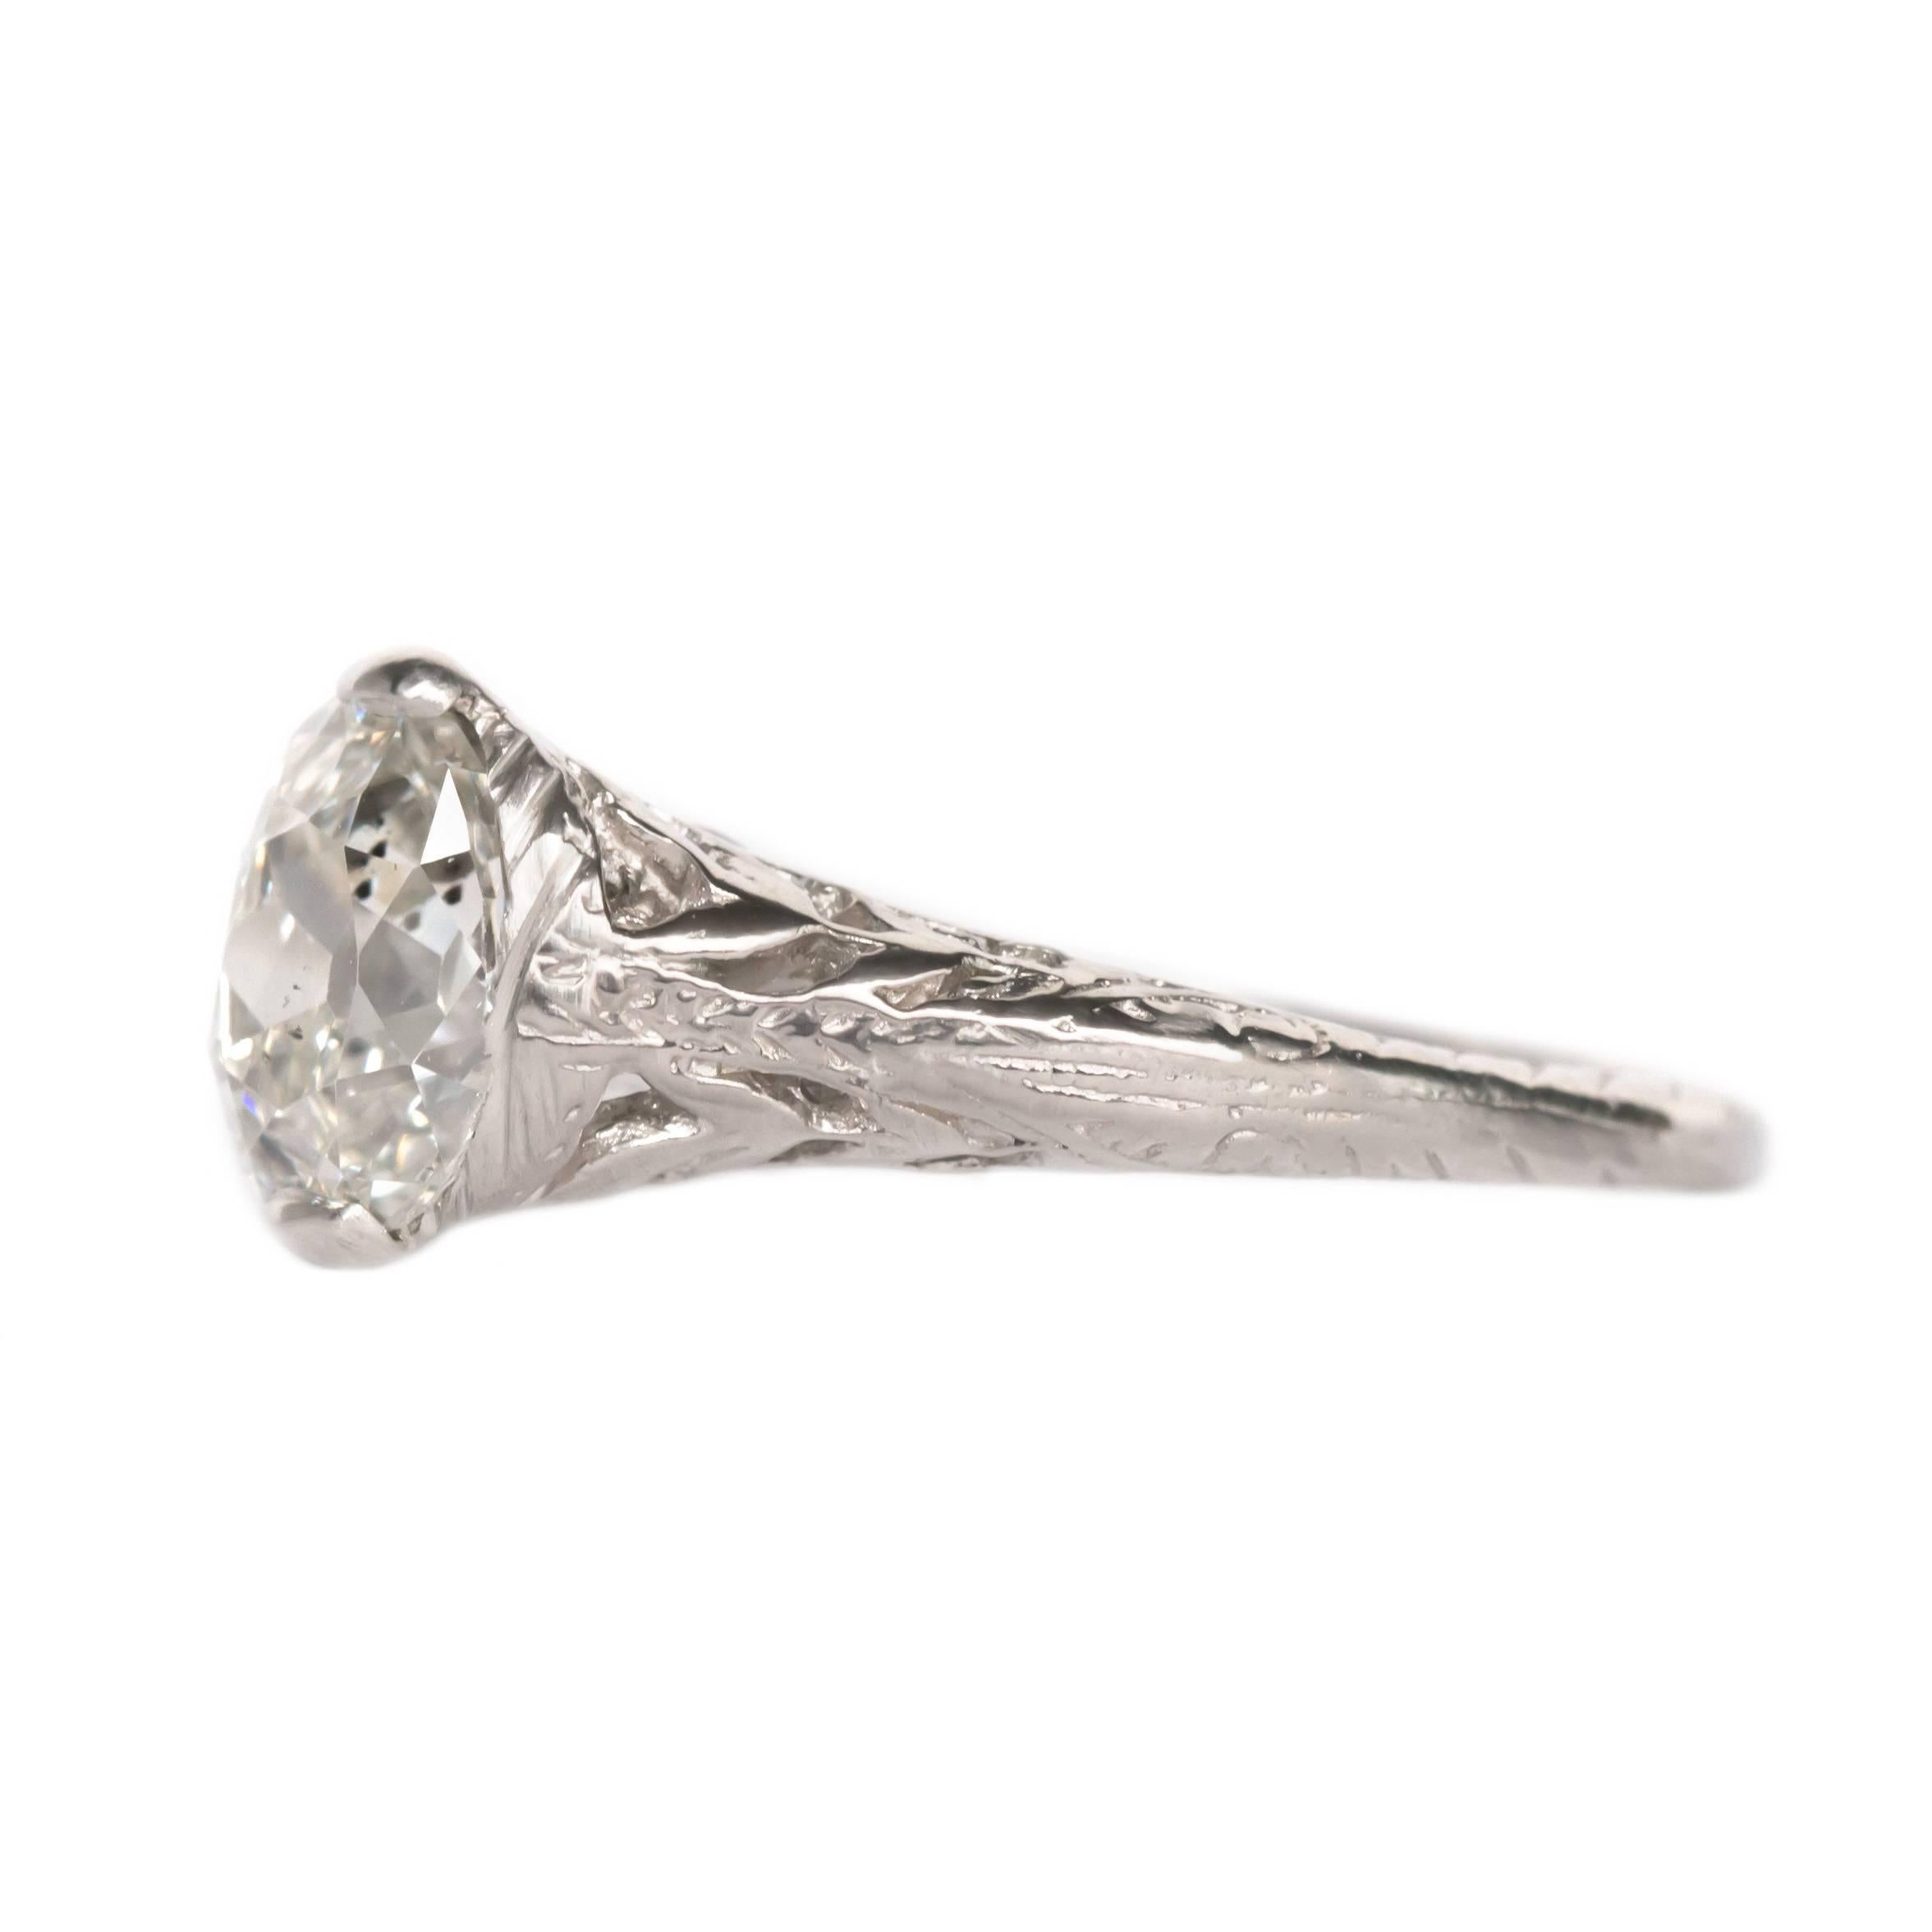 Item Details: 
Ring Size: Approximately 4.60
Metal Type: Platinum
Weight: 3.6 grams

Center Diamond Details
GIA CERTIFIED Center Diamond - Certificate # 5192045825
Shape: Pear Brilliant
Carat Weight: 1.00 carat
Color: I
Clarity: SI1

Side Stone